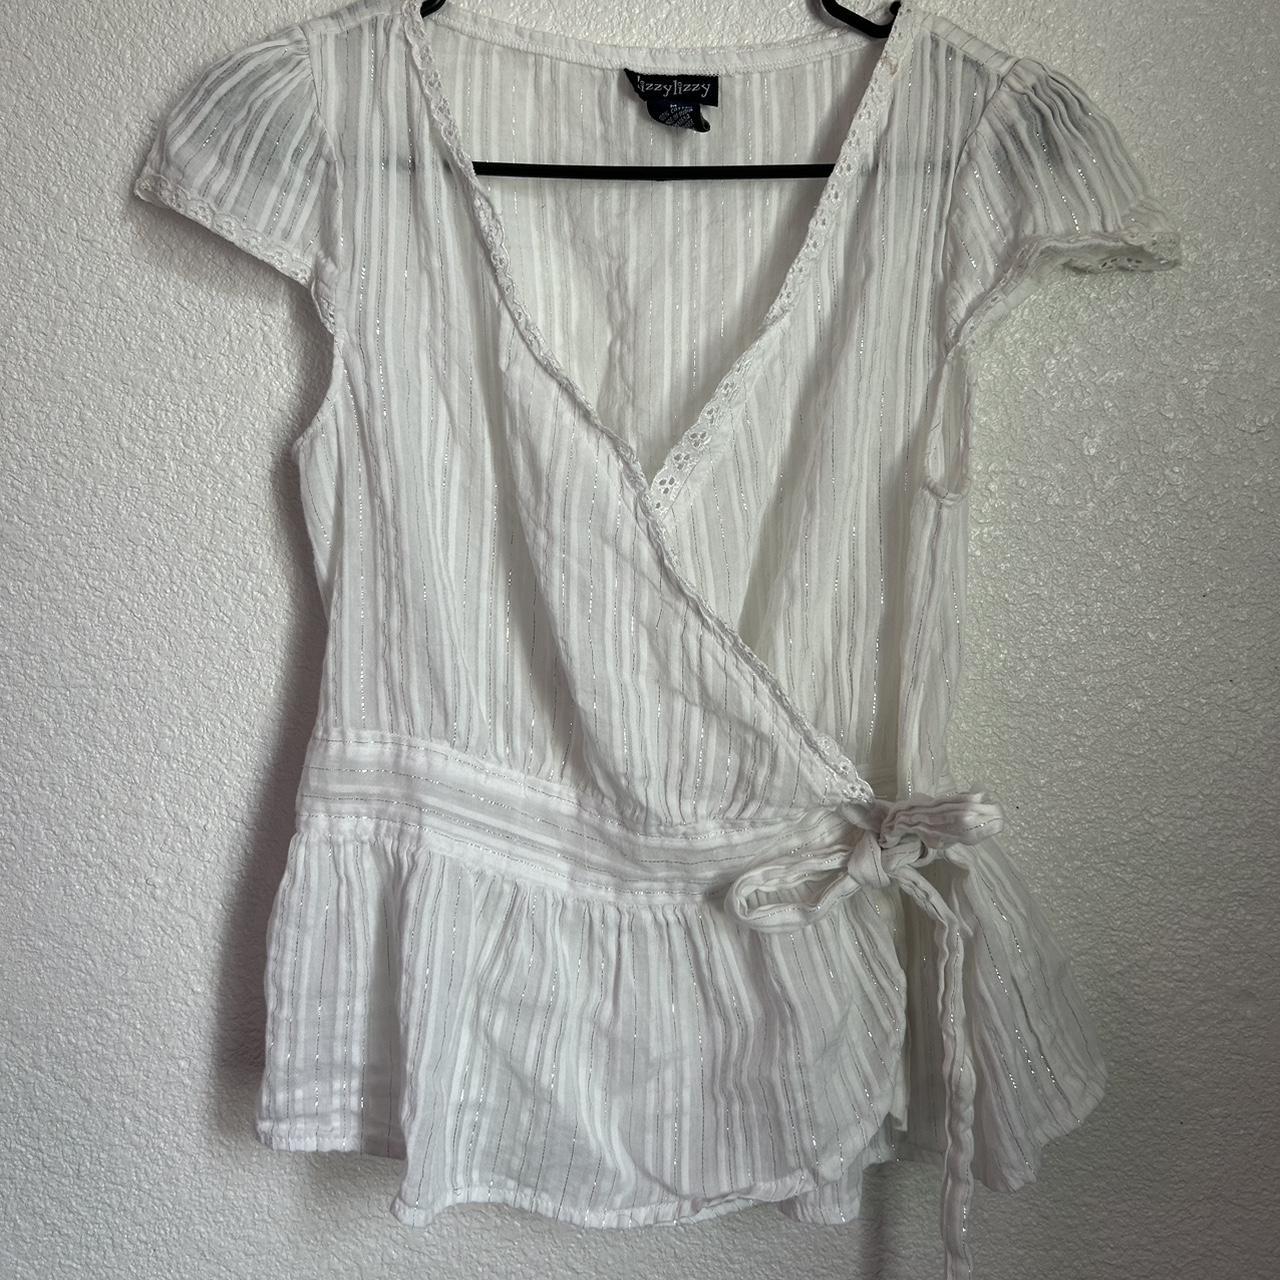 item listed by kittensvintage